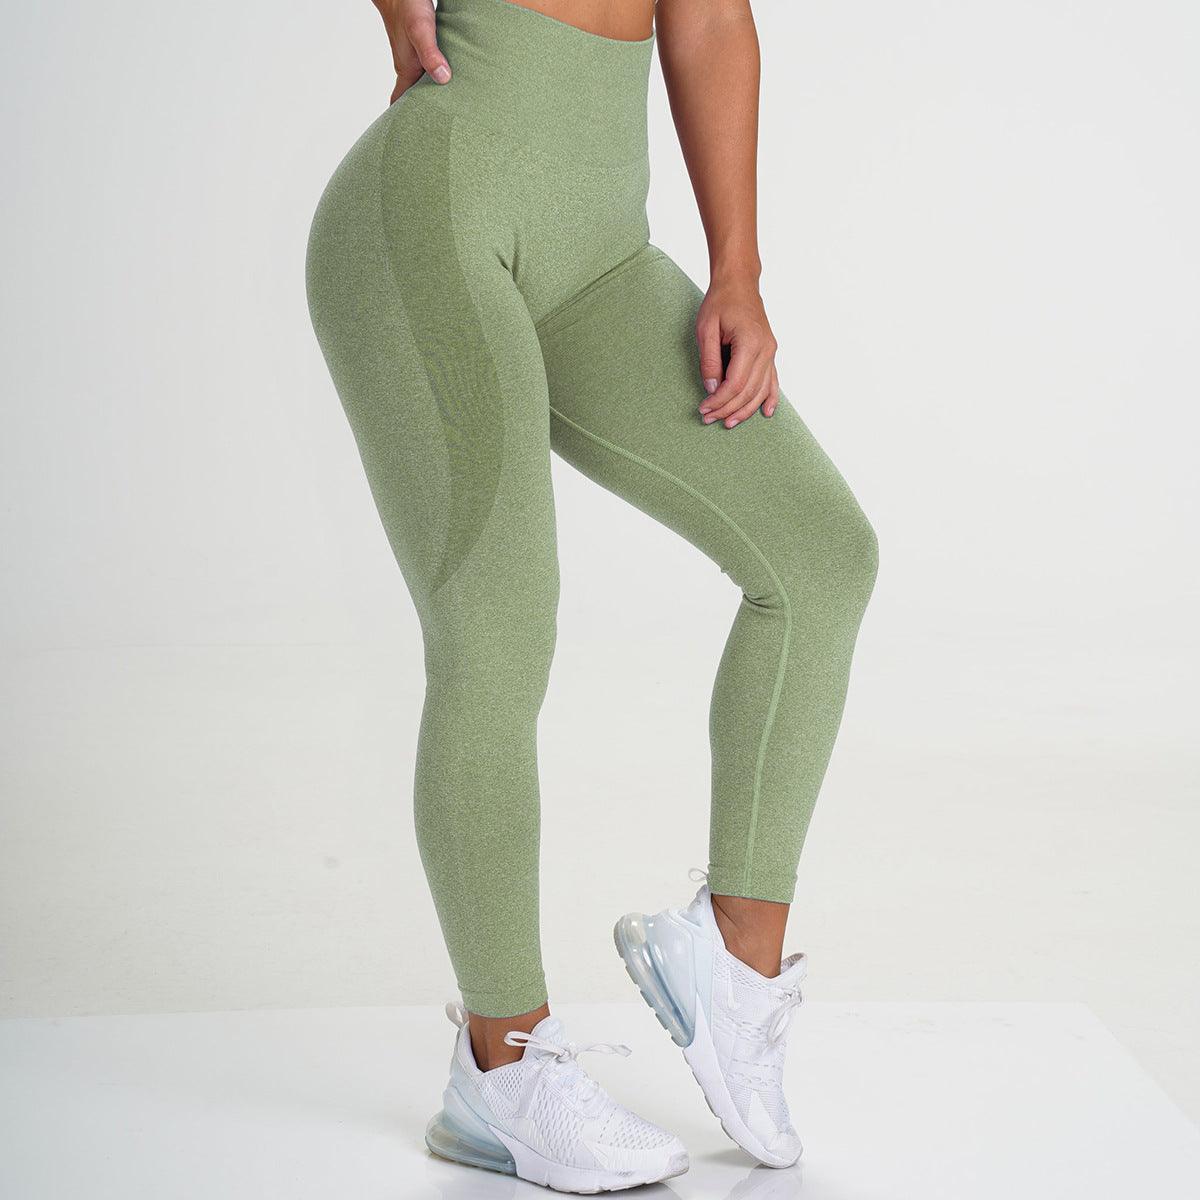 Seamless Breathable Quick-Drying Yoga Pants - High Rise Full-Length Solid Leggings - ForVanity Leggings, women's sports & entertainment Activewear Pants